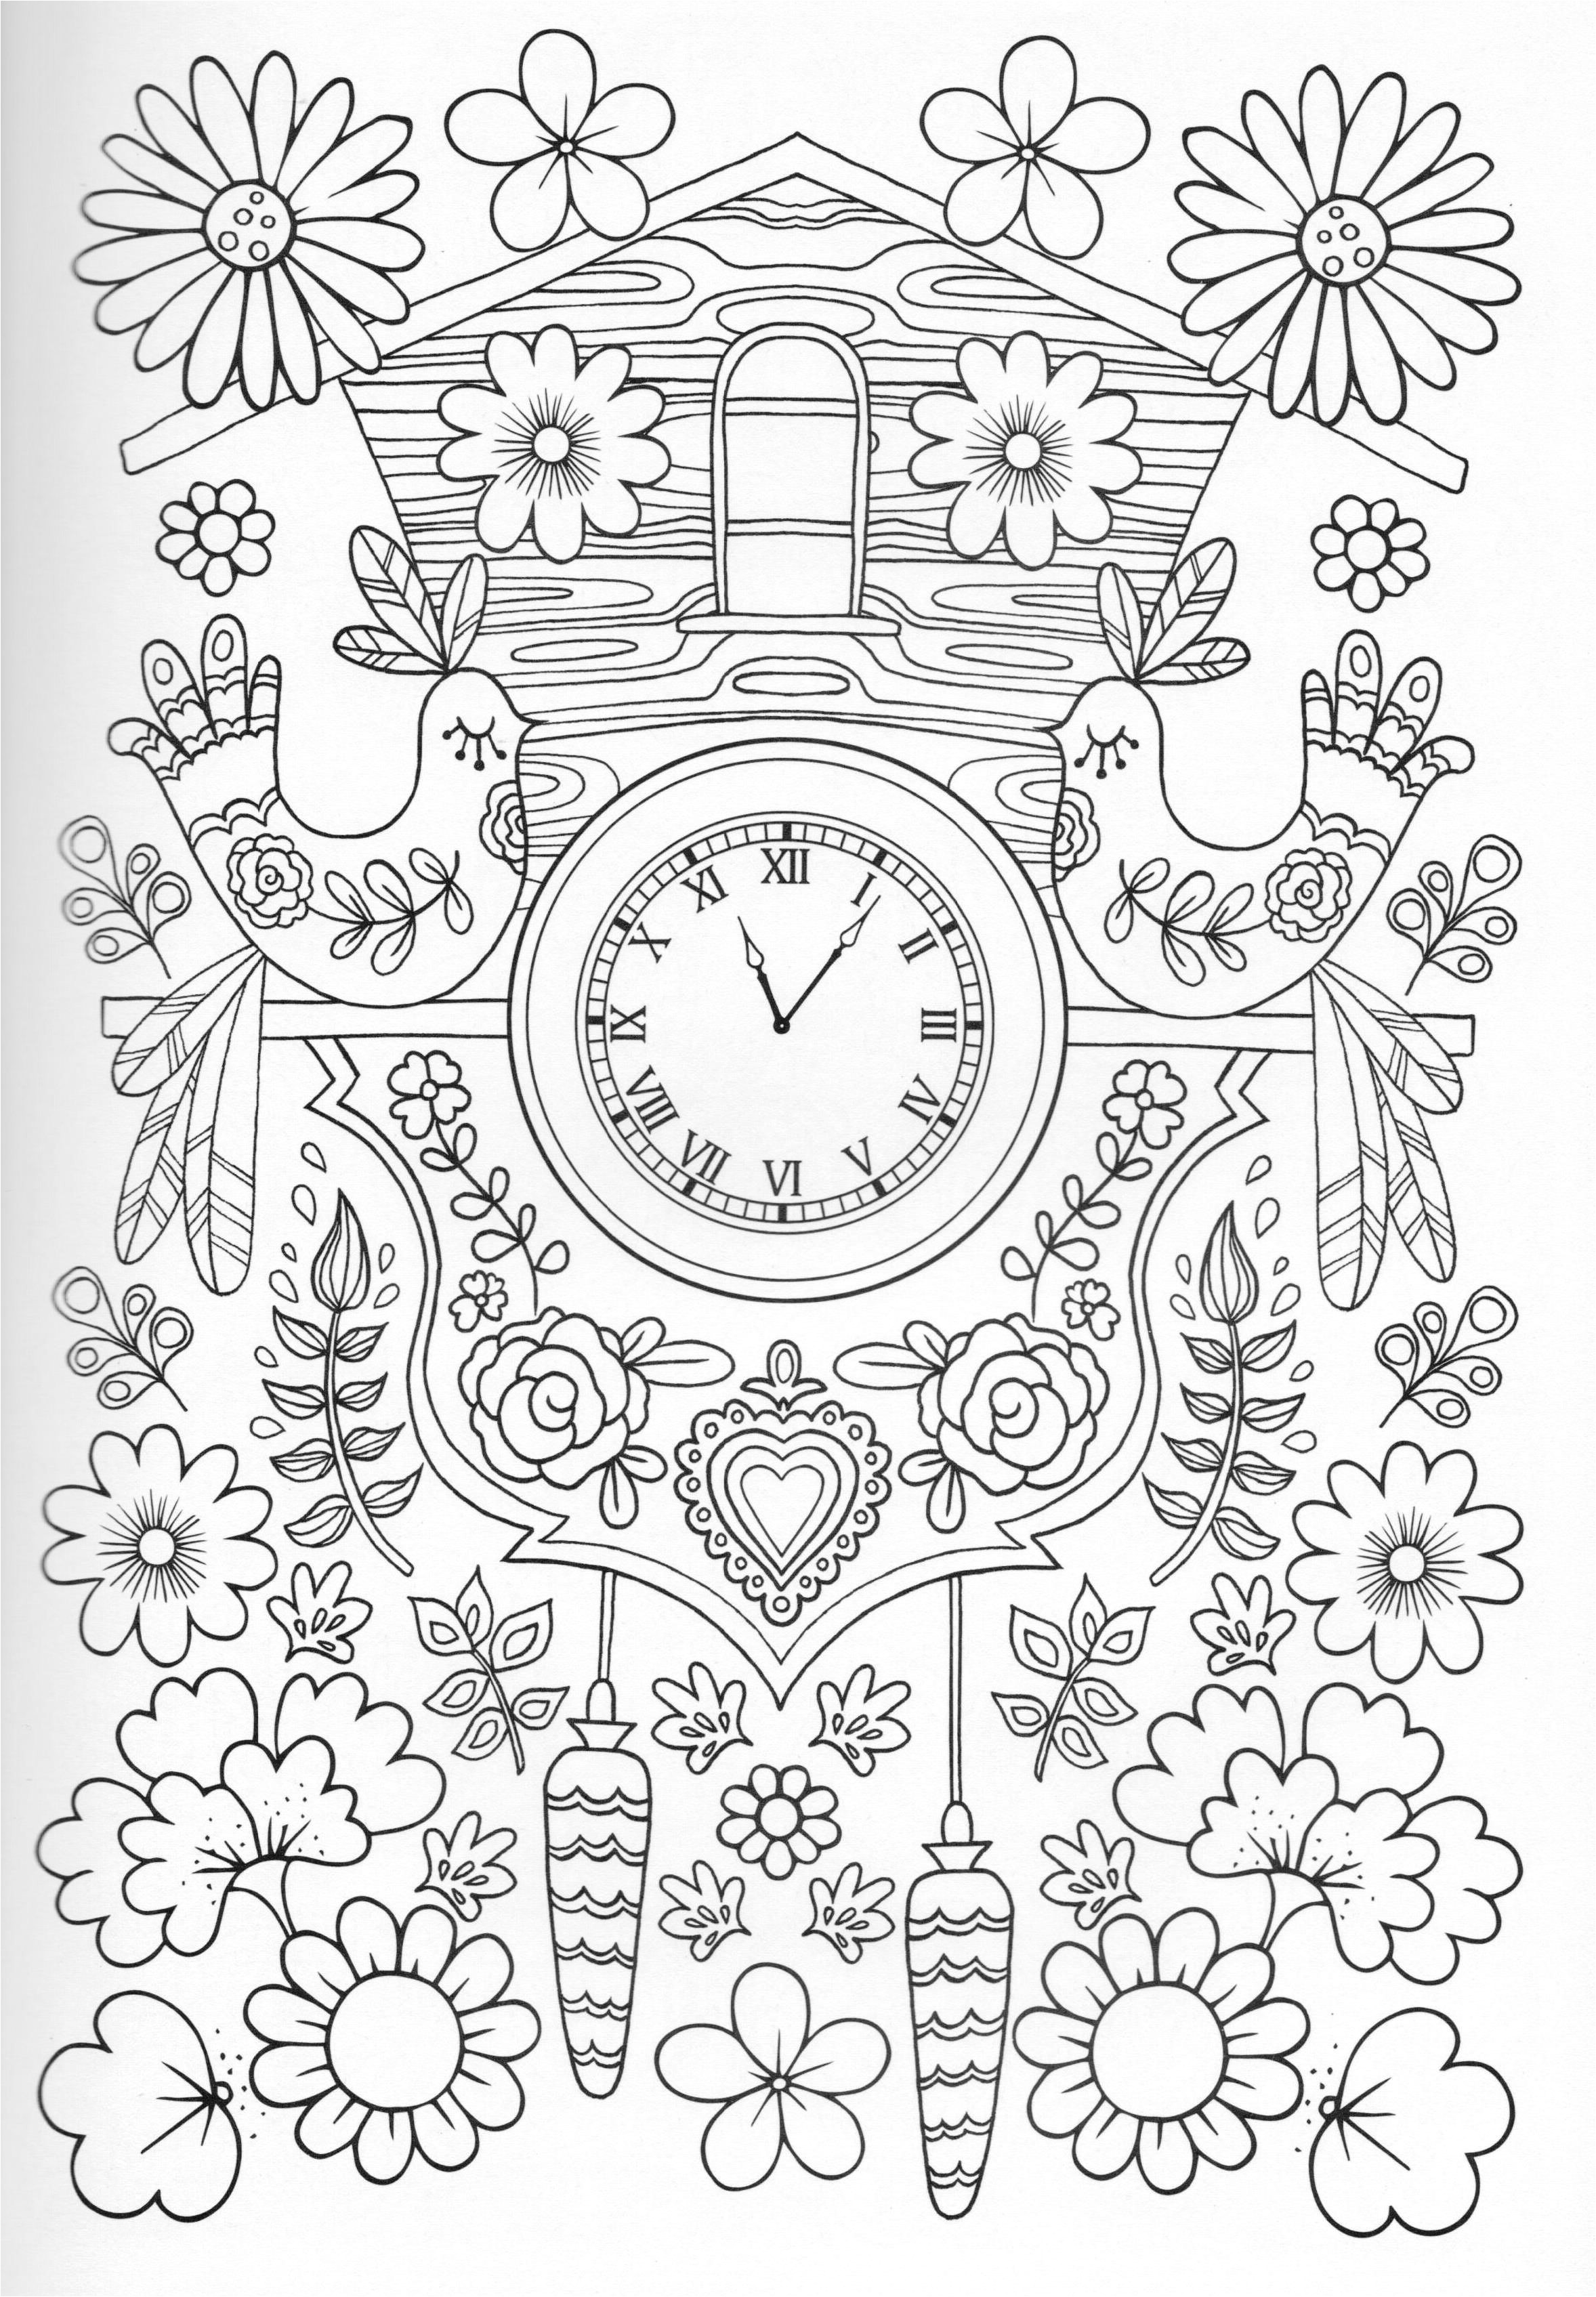 Adult coloring page